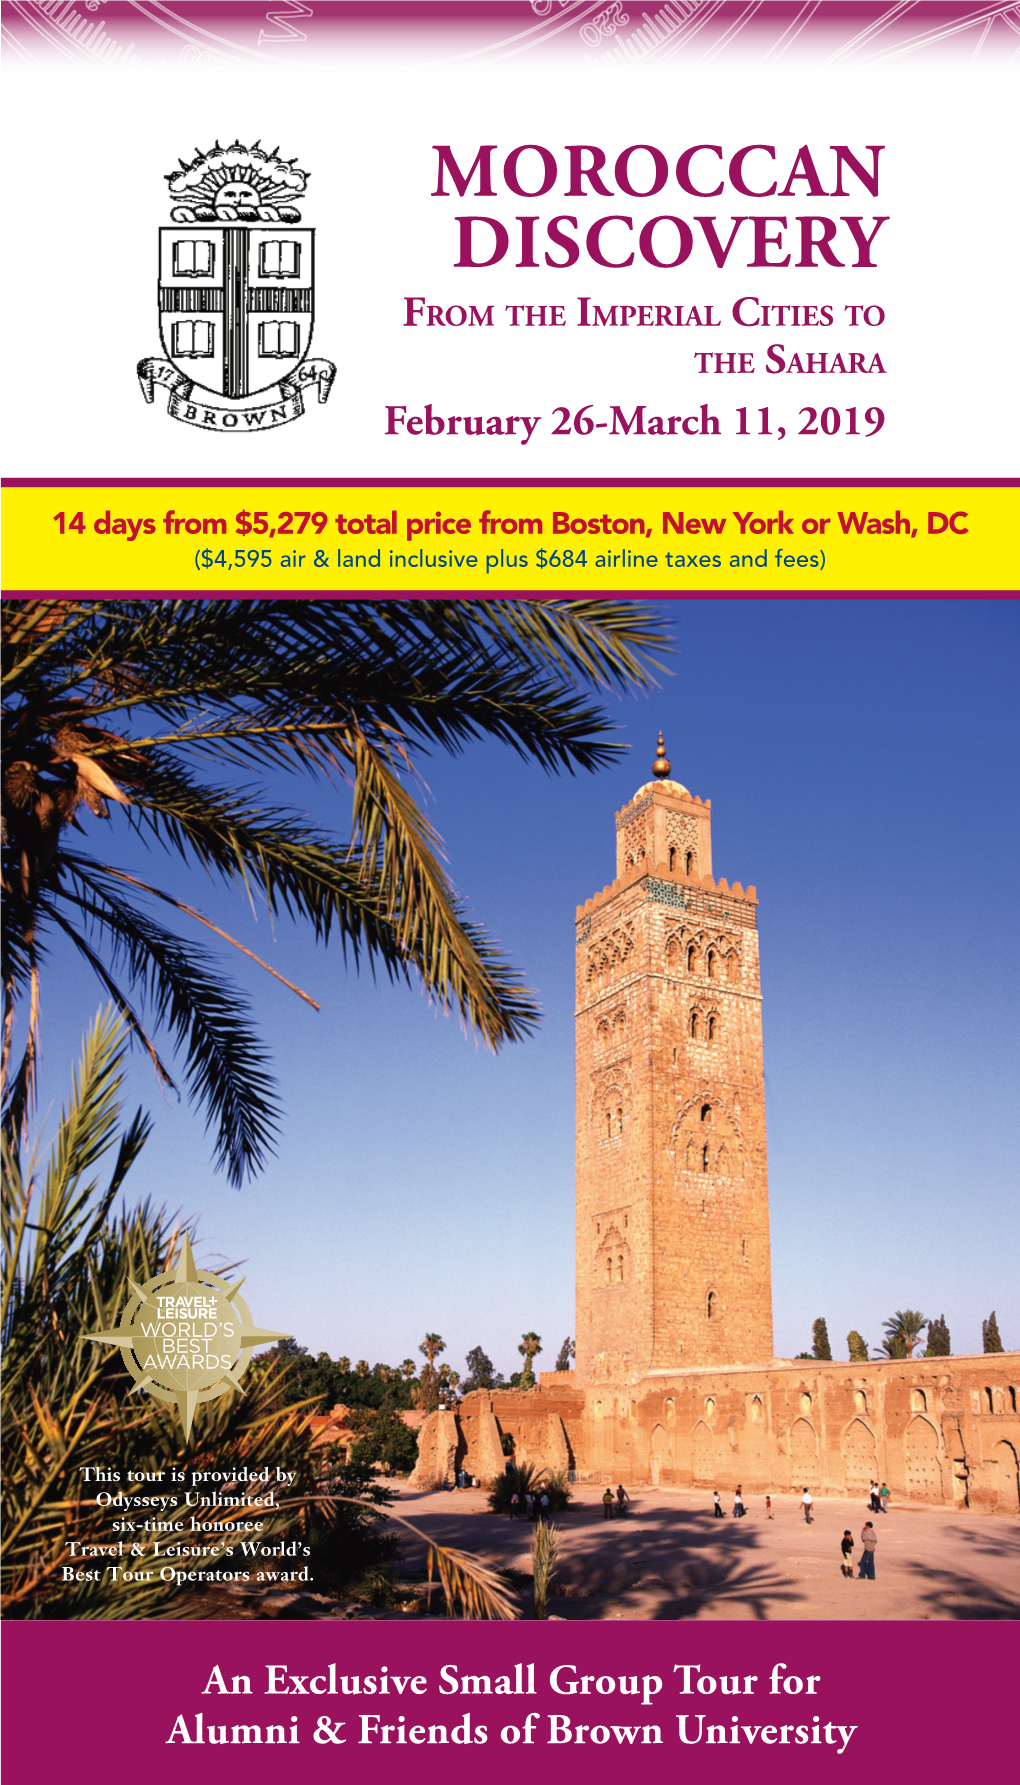 MOROCCAN DISCOVERY from the Imperial Cities to the Sahara February 26-March 11, 2019